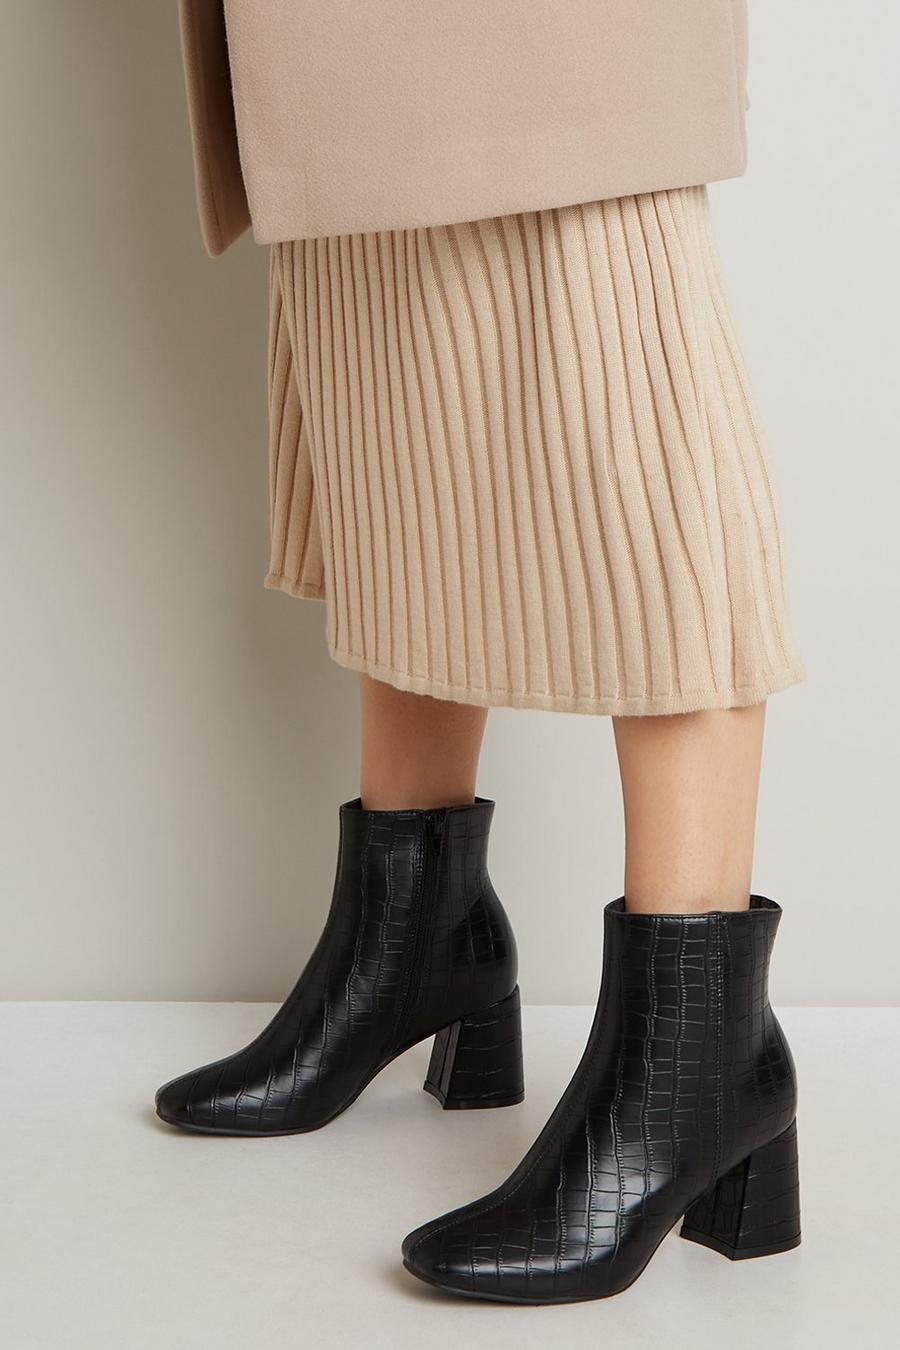 Mabel Heeled Ankle Boot